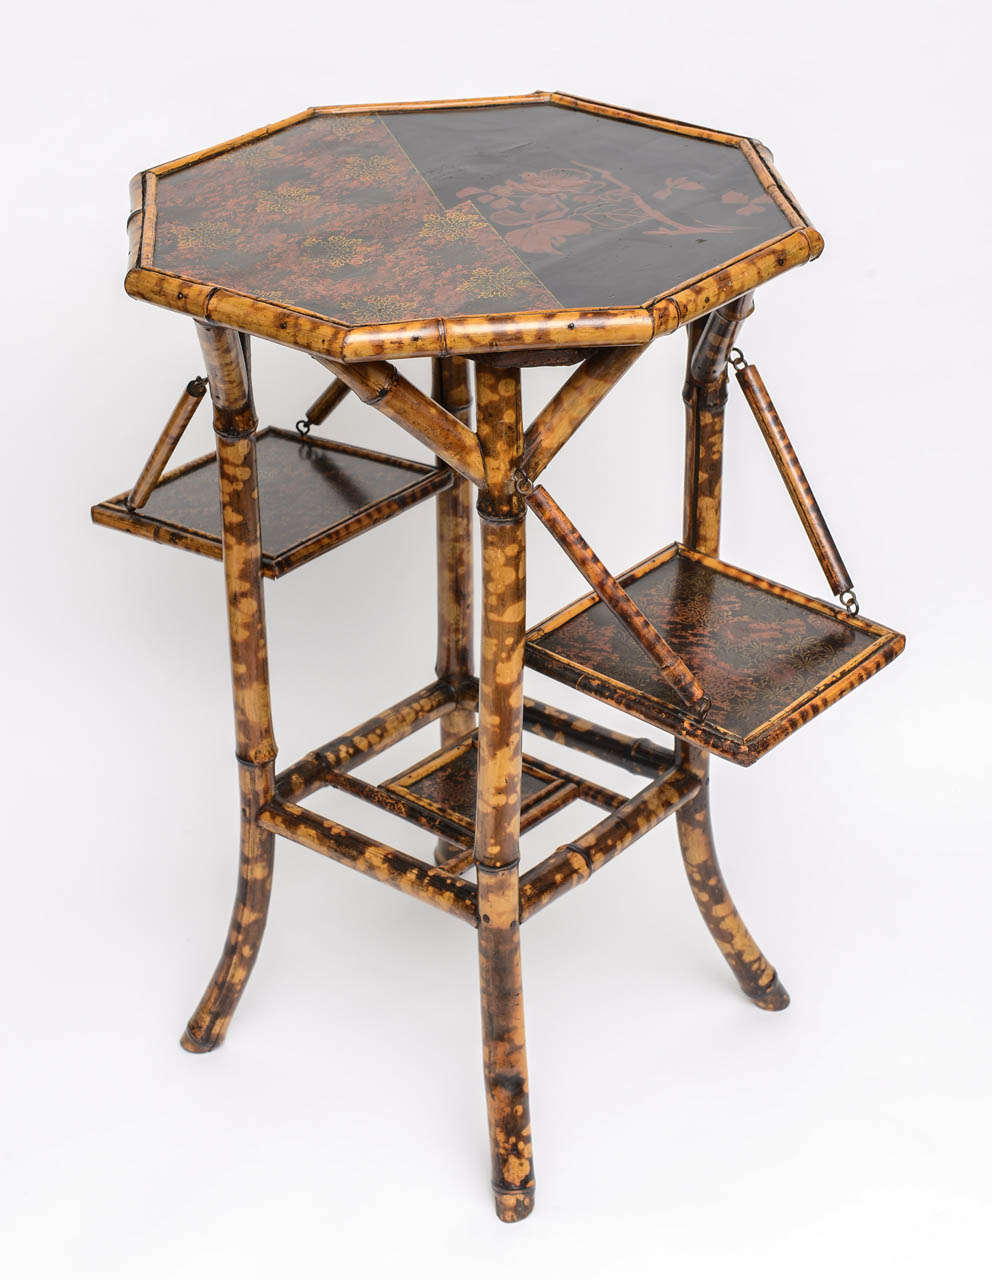 A lovely 19th Century English Bamboo side table with beautiful japanning and two side panels that fold up and down.